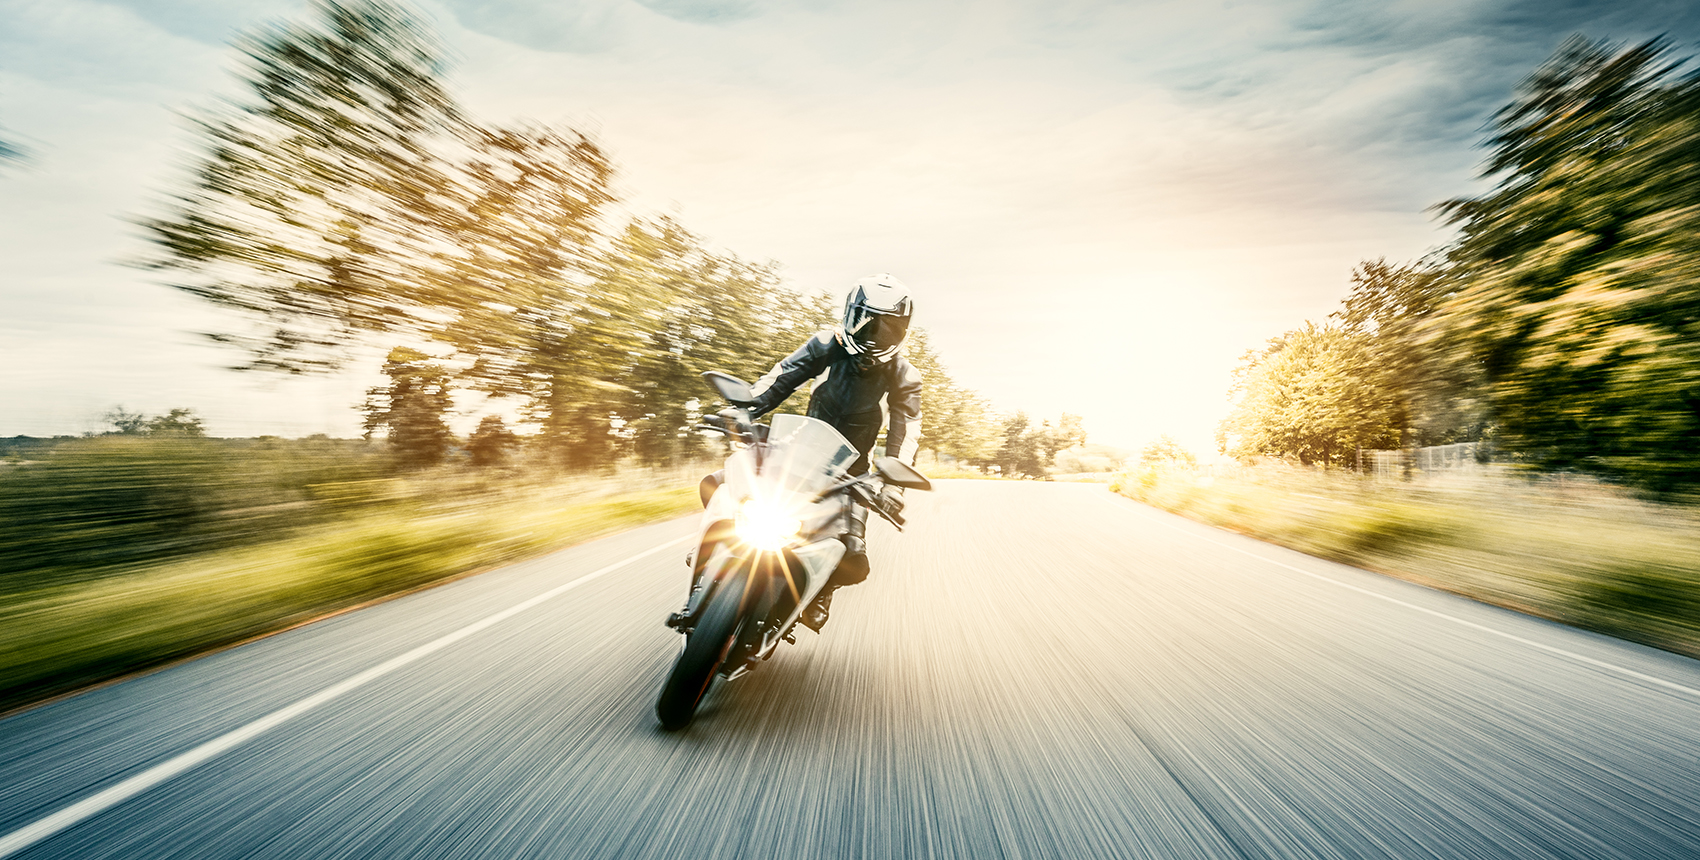 Motion blurred photo of a backlit motorcycle on a tree-lined road.